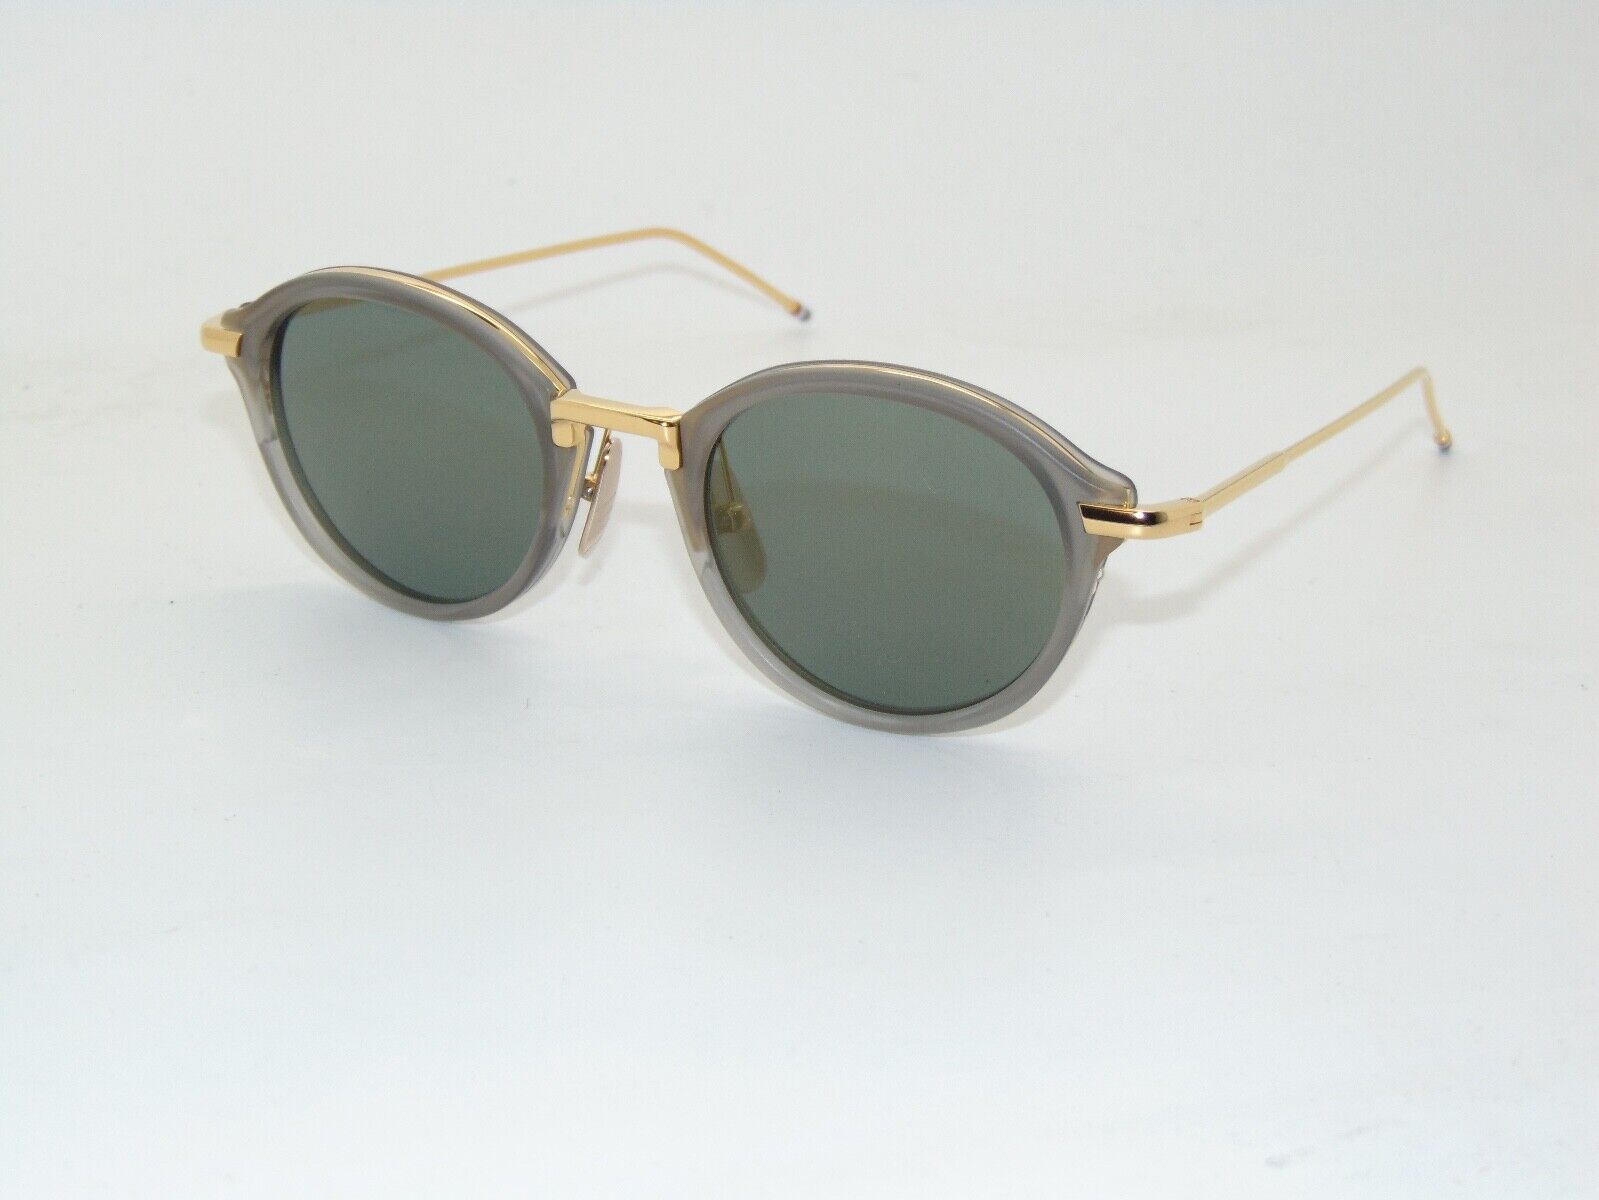 New THOM BROWNE TB-011-G-T-GRY-GLD Grey/Gold Authentic 46mm Sunglasses